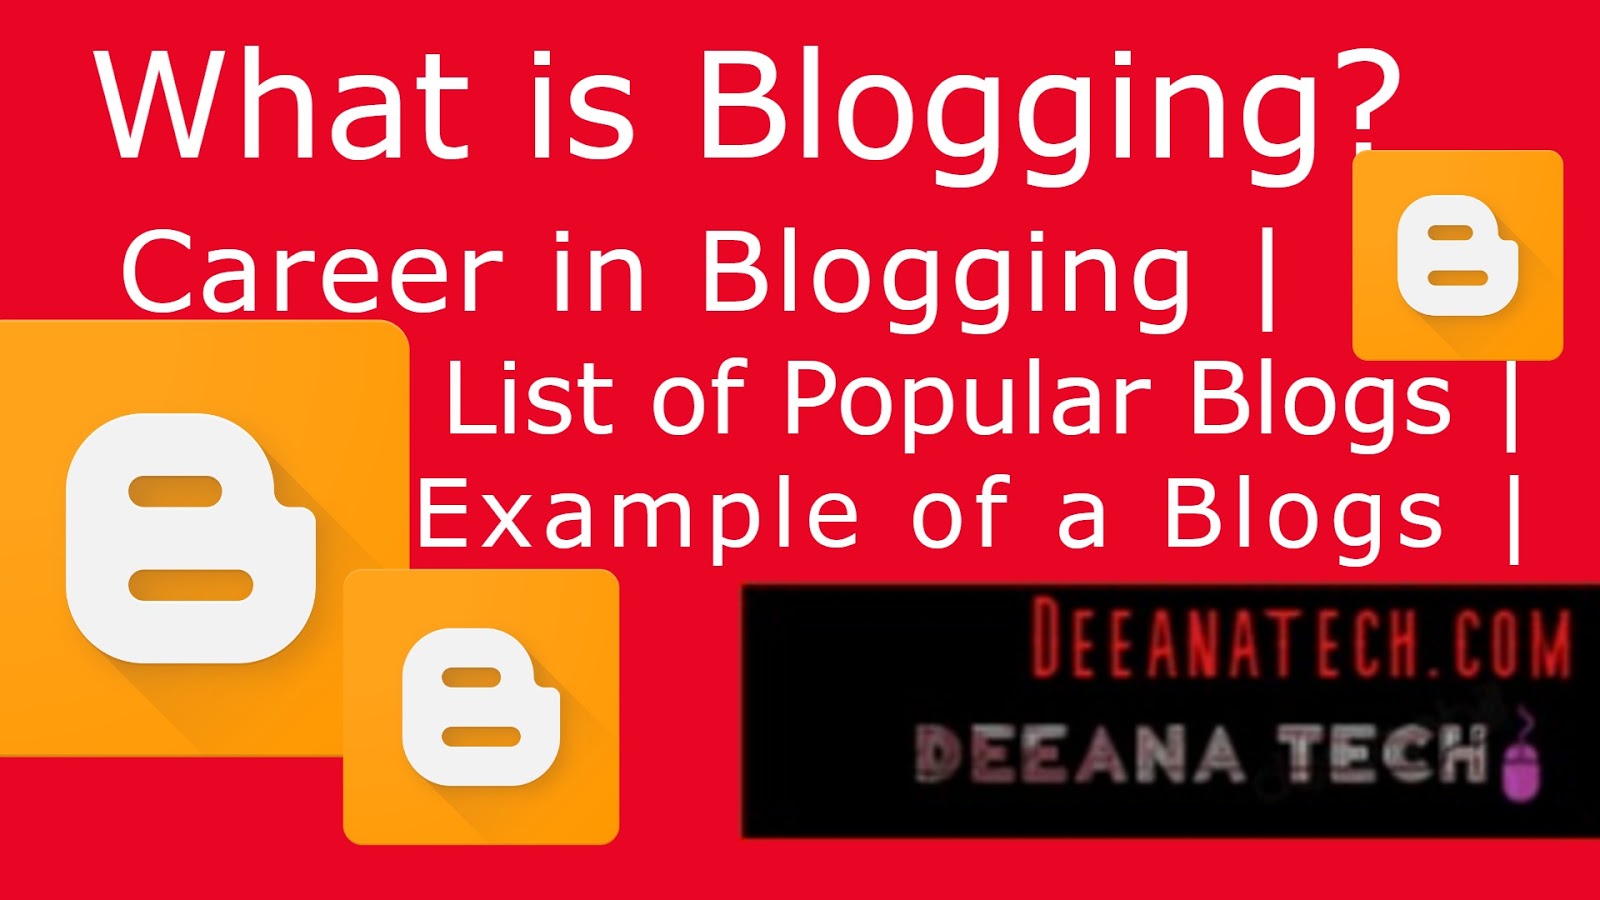 Career in Blogging | What is blogging? | Popular Blogs | Example of a Blog | Buy hosting, Free hosting- deeanatech.com